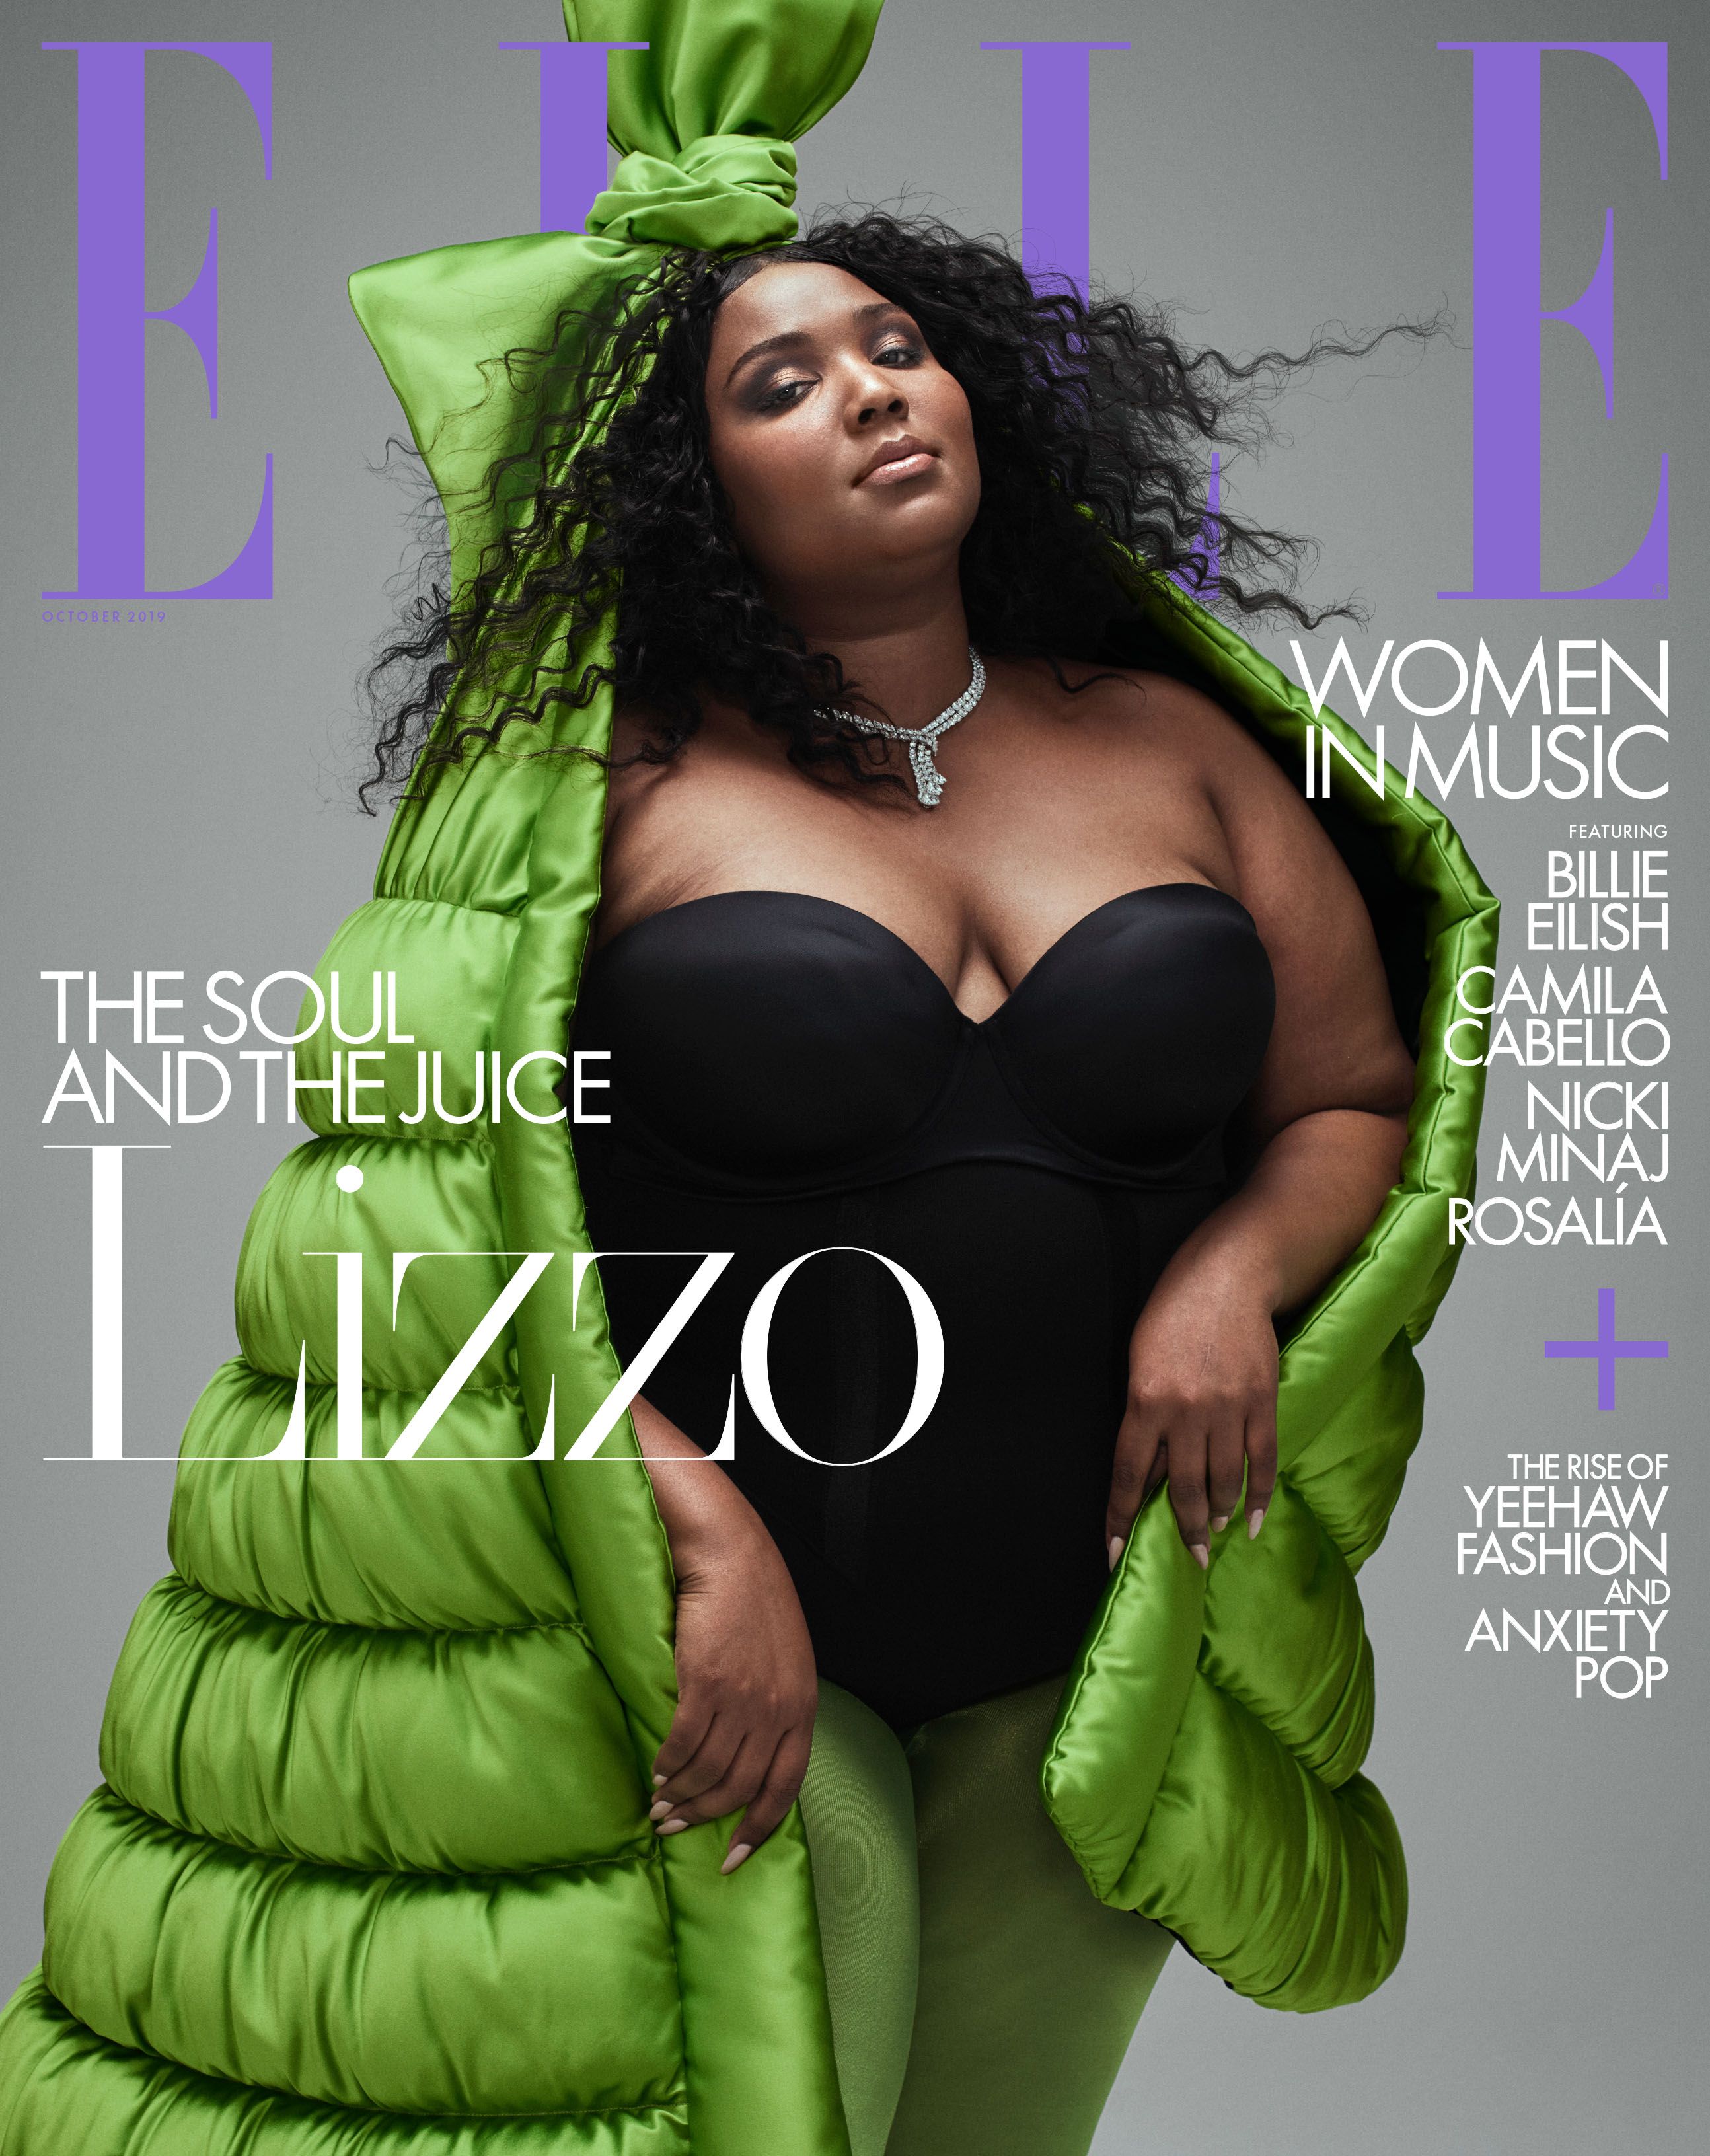 Lizzo Says She Chose Her Concert Outfits to Make a 'Feminist